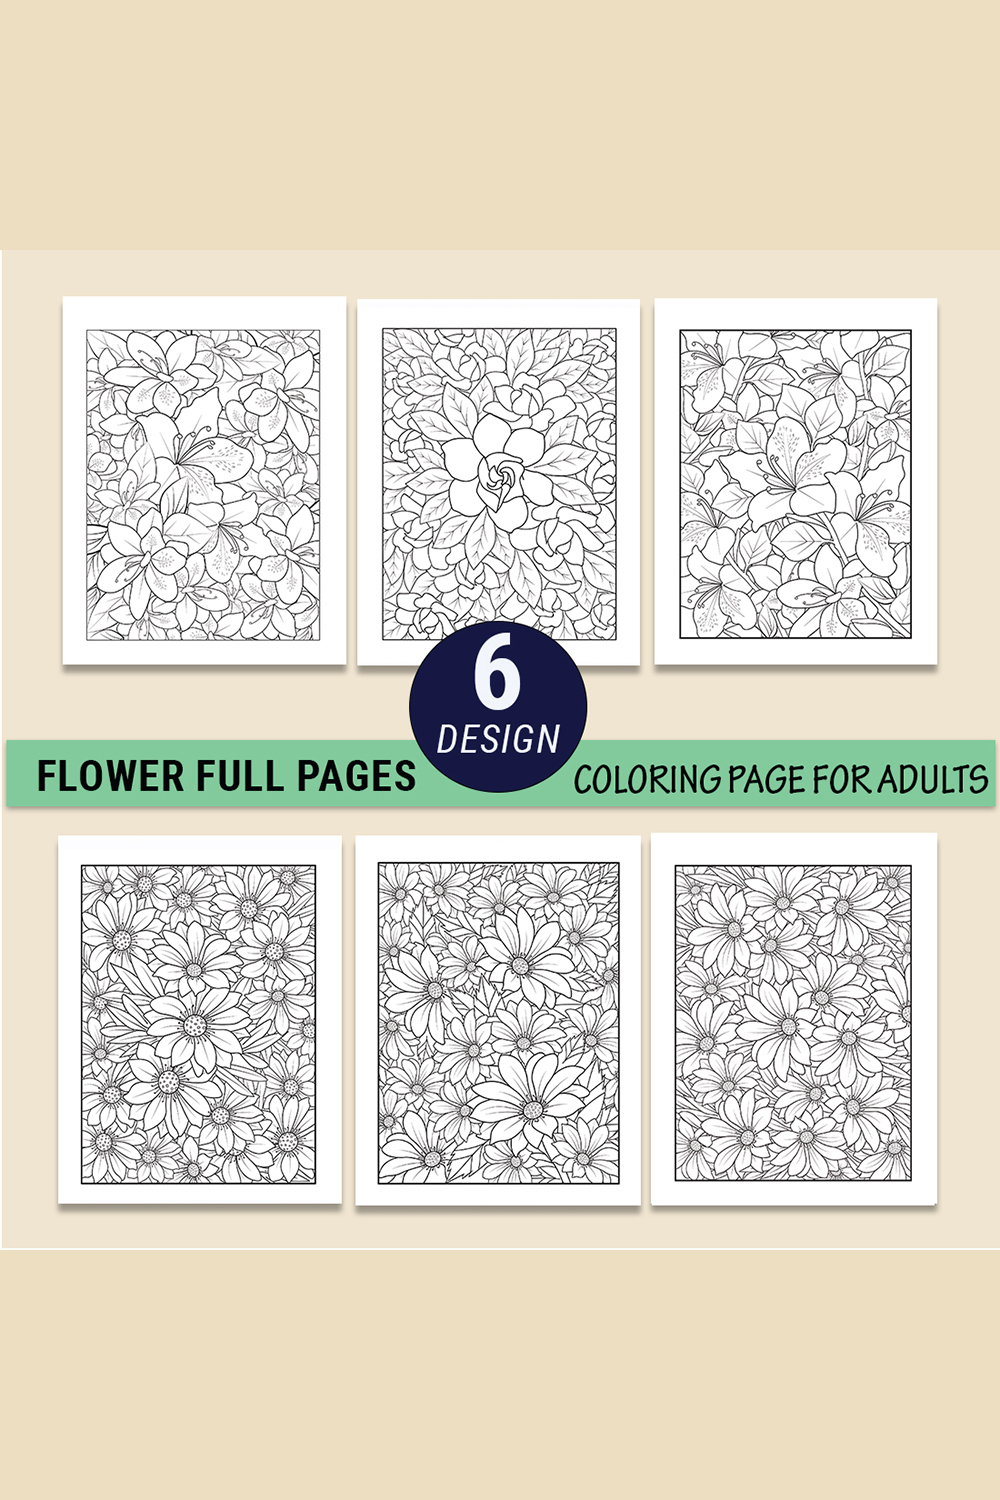 flower cluster drawing, relaxation flower coloring pages for adults, detailed flower coloring pages pinterest preview image.